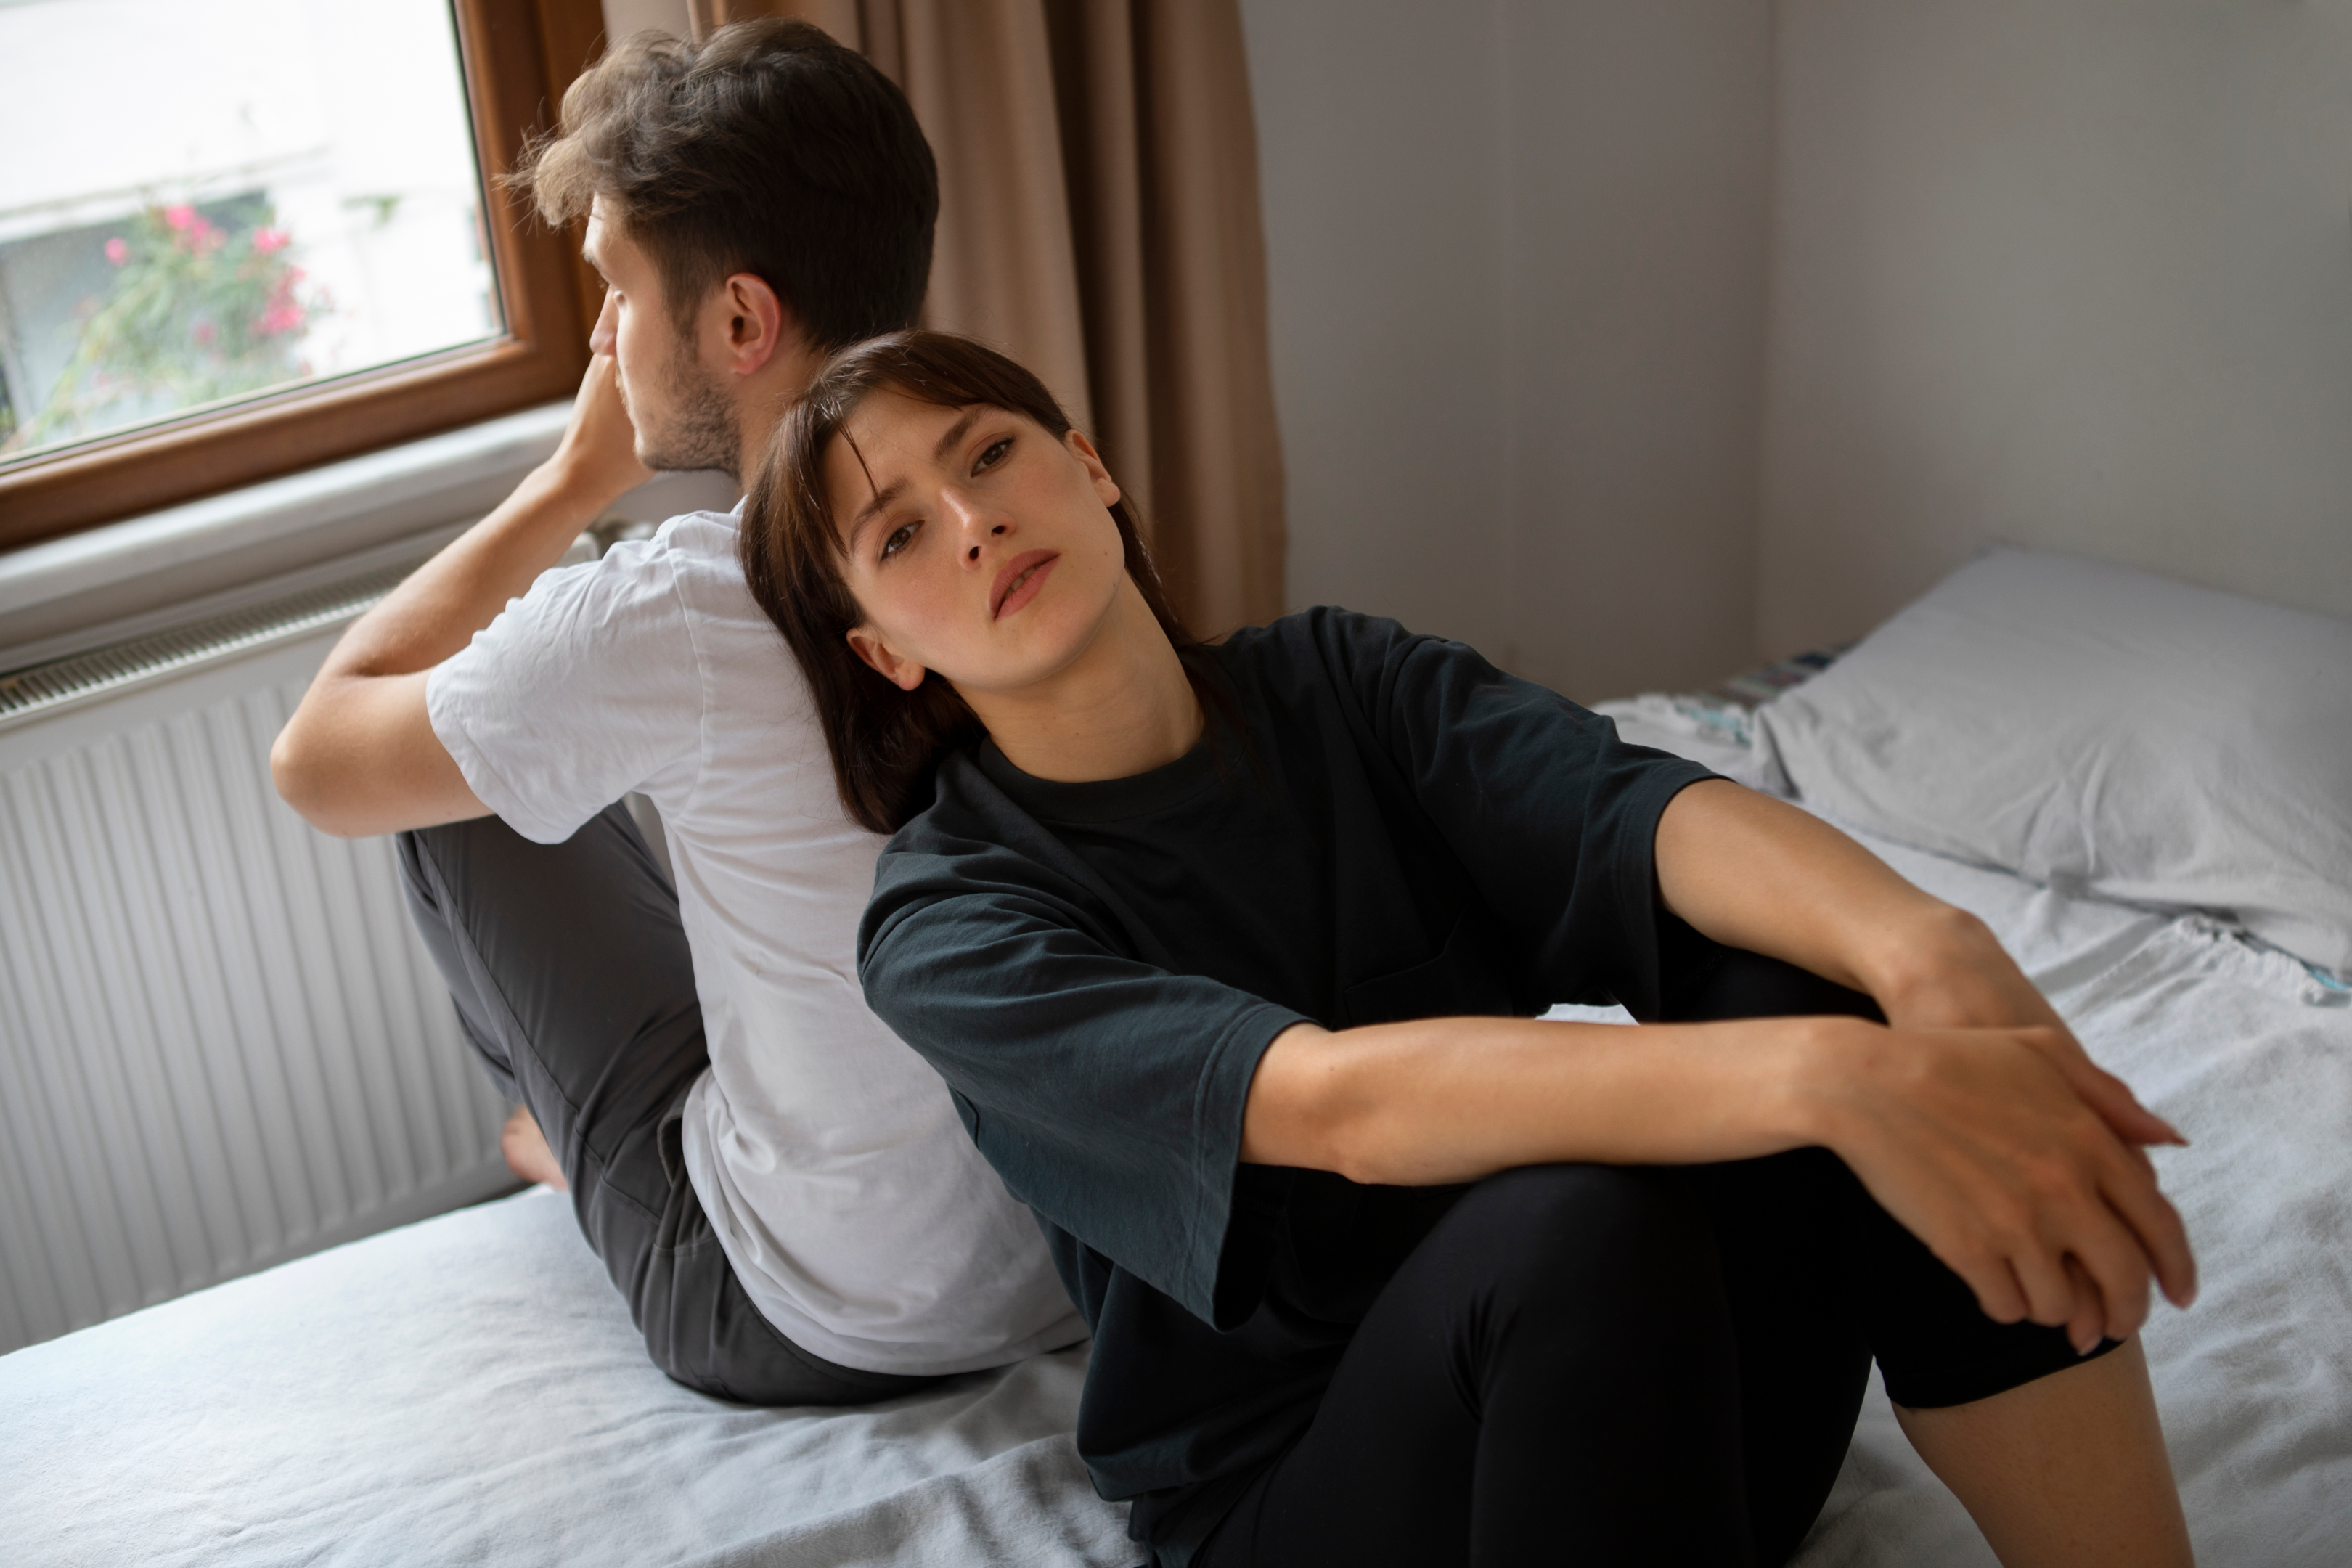 Sexually transmitted infections can be ruinous for your relationship.